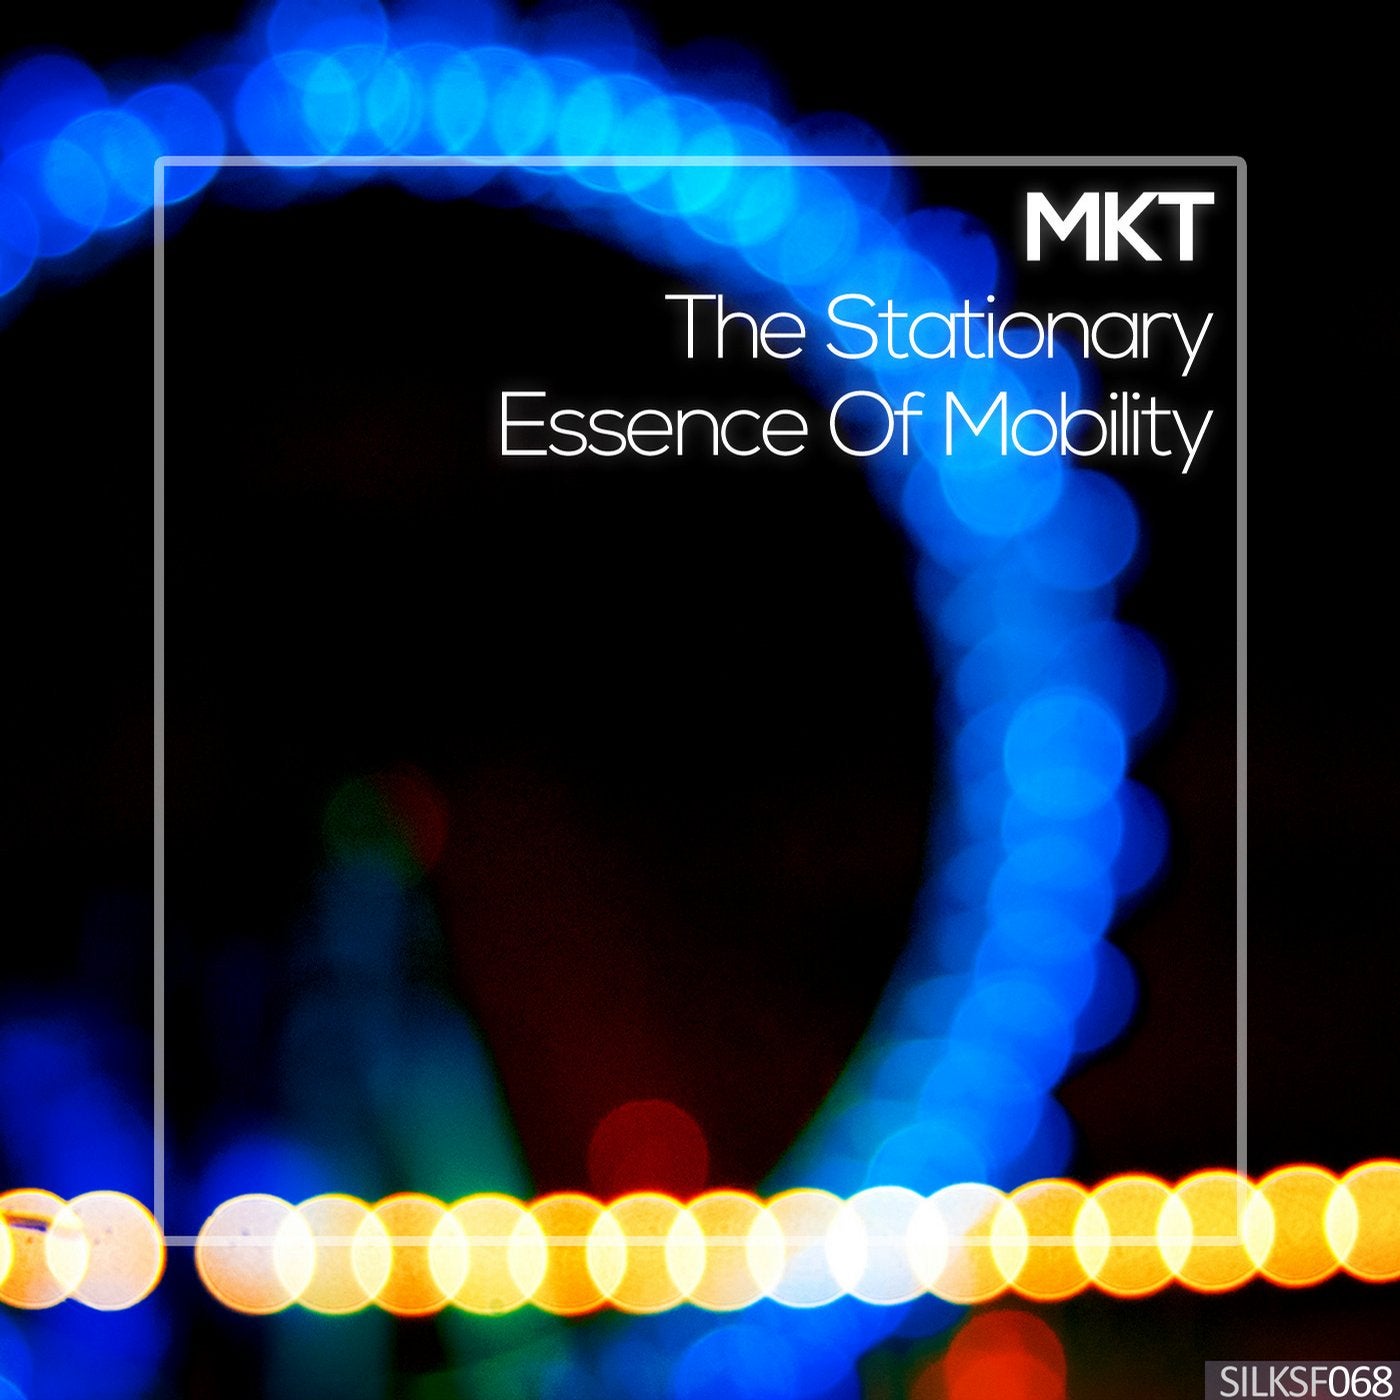 The Stationary Essence of Mobility